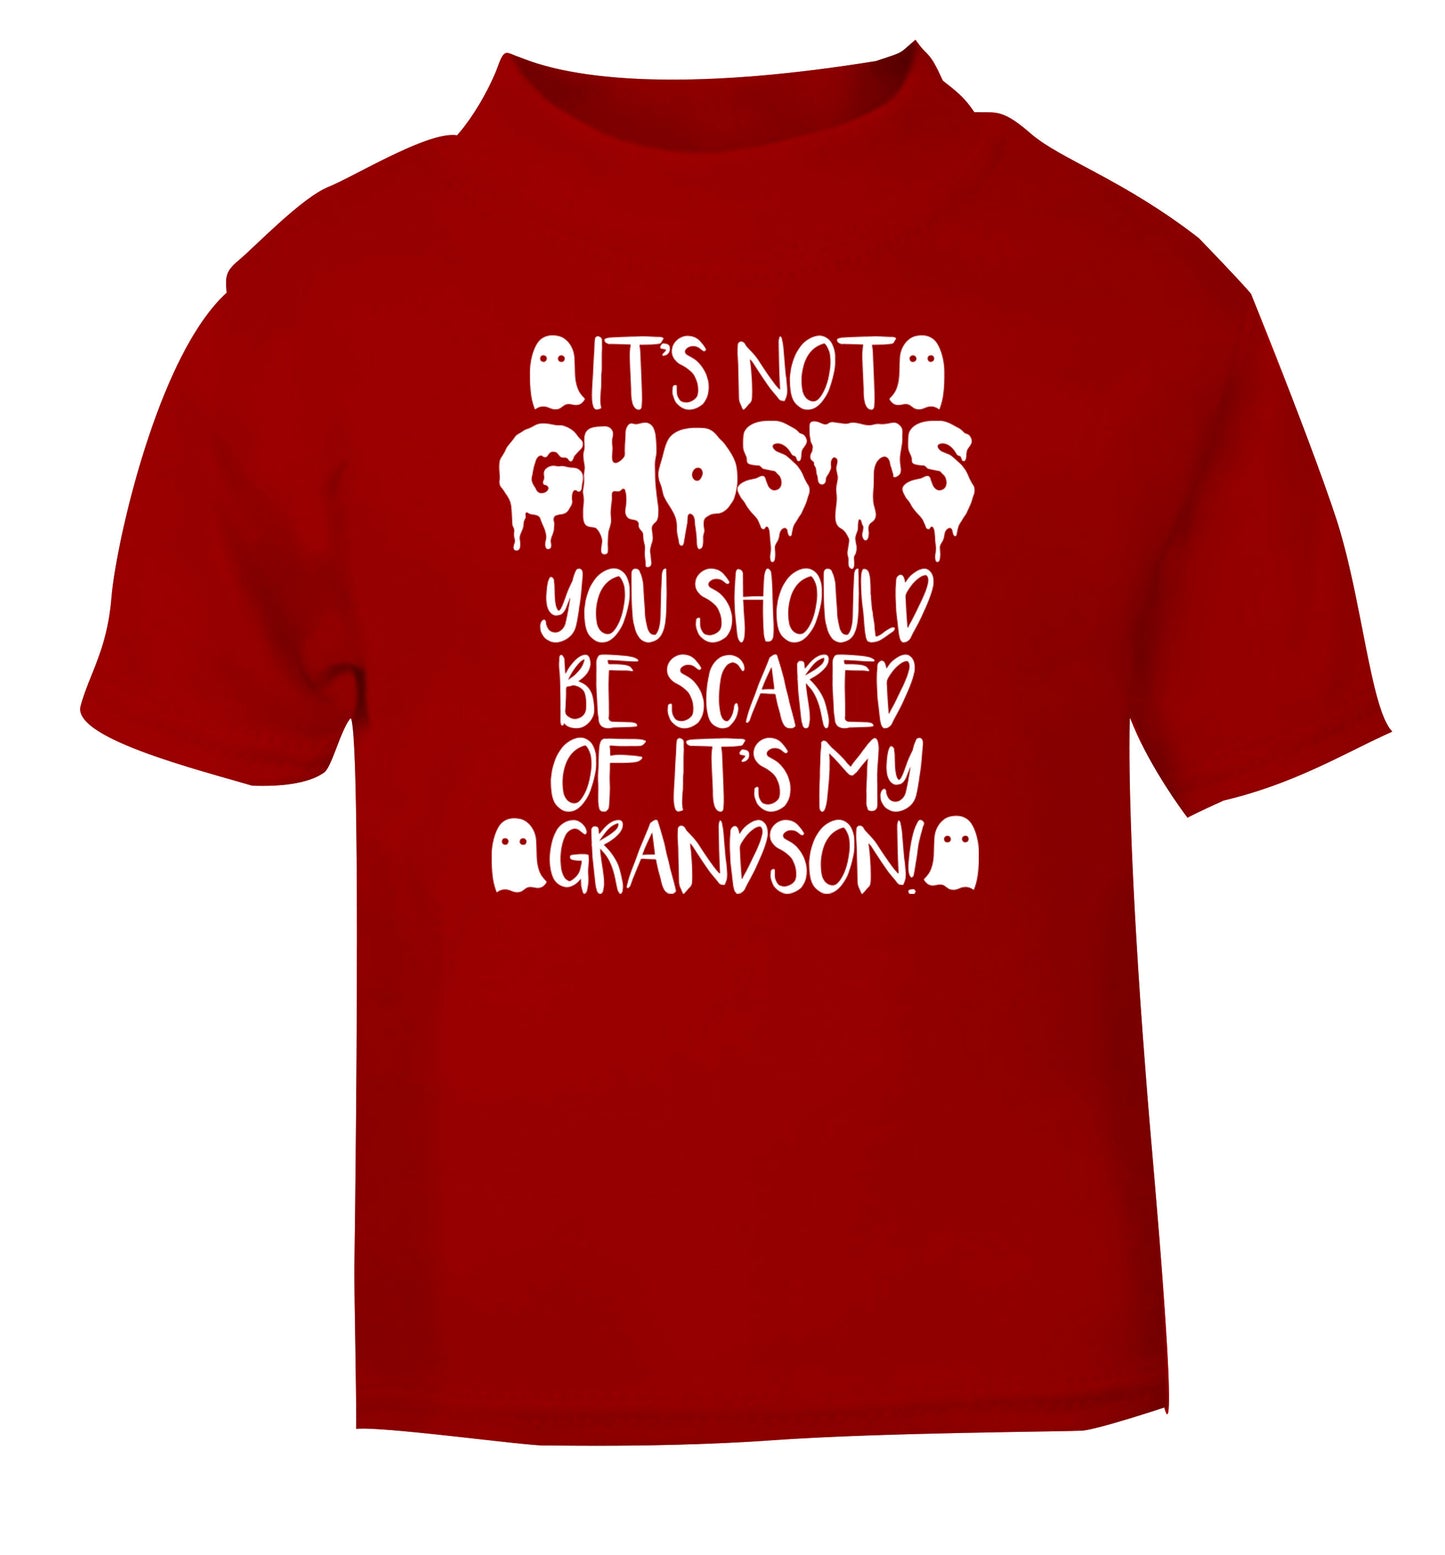 It's not ghosts you should be scared of it's my grandson! red Baby Toddler Tshirt 2 Years